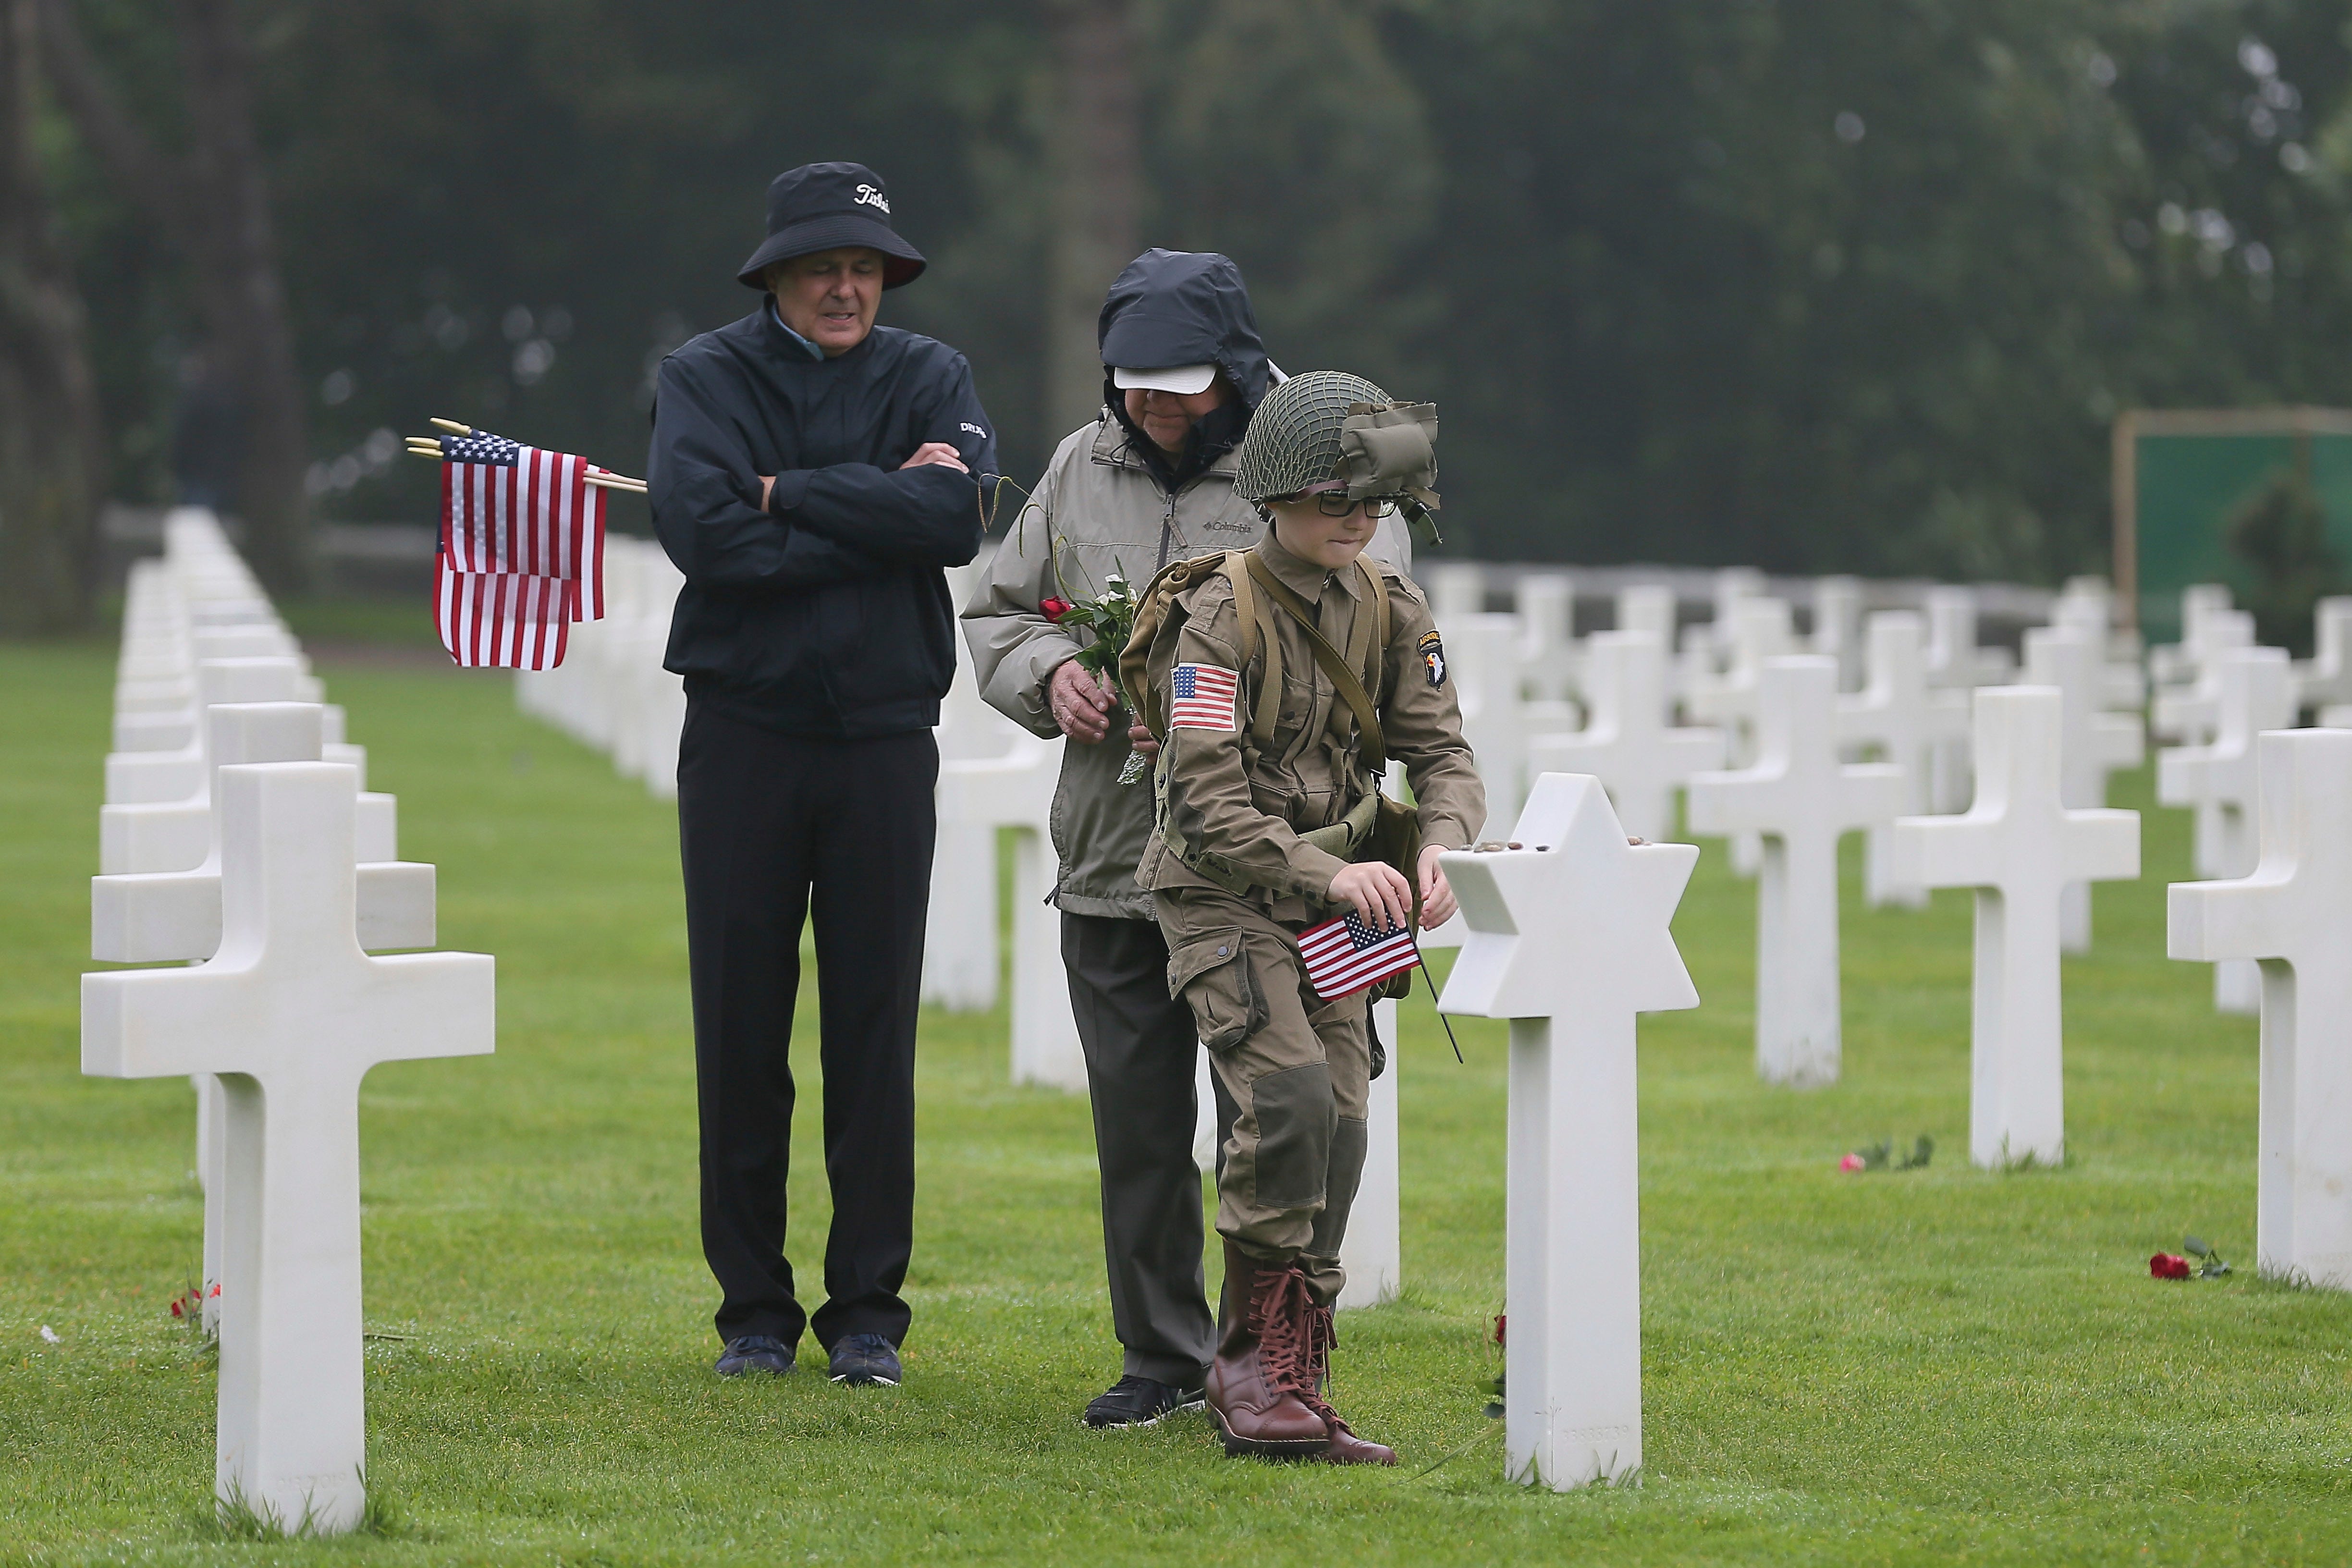 David Chamberlain, left, grandfather Charly Powers and his son Steve, from Atlanta, Georgia, pay their respect by putting down a US flag on the grave of a US soldier who died during World War II at the Colleville American military cemetery, in Collev